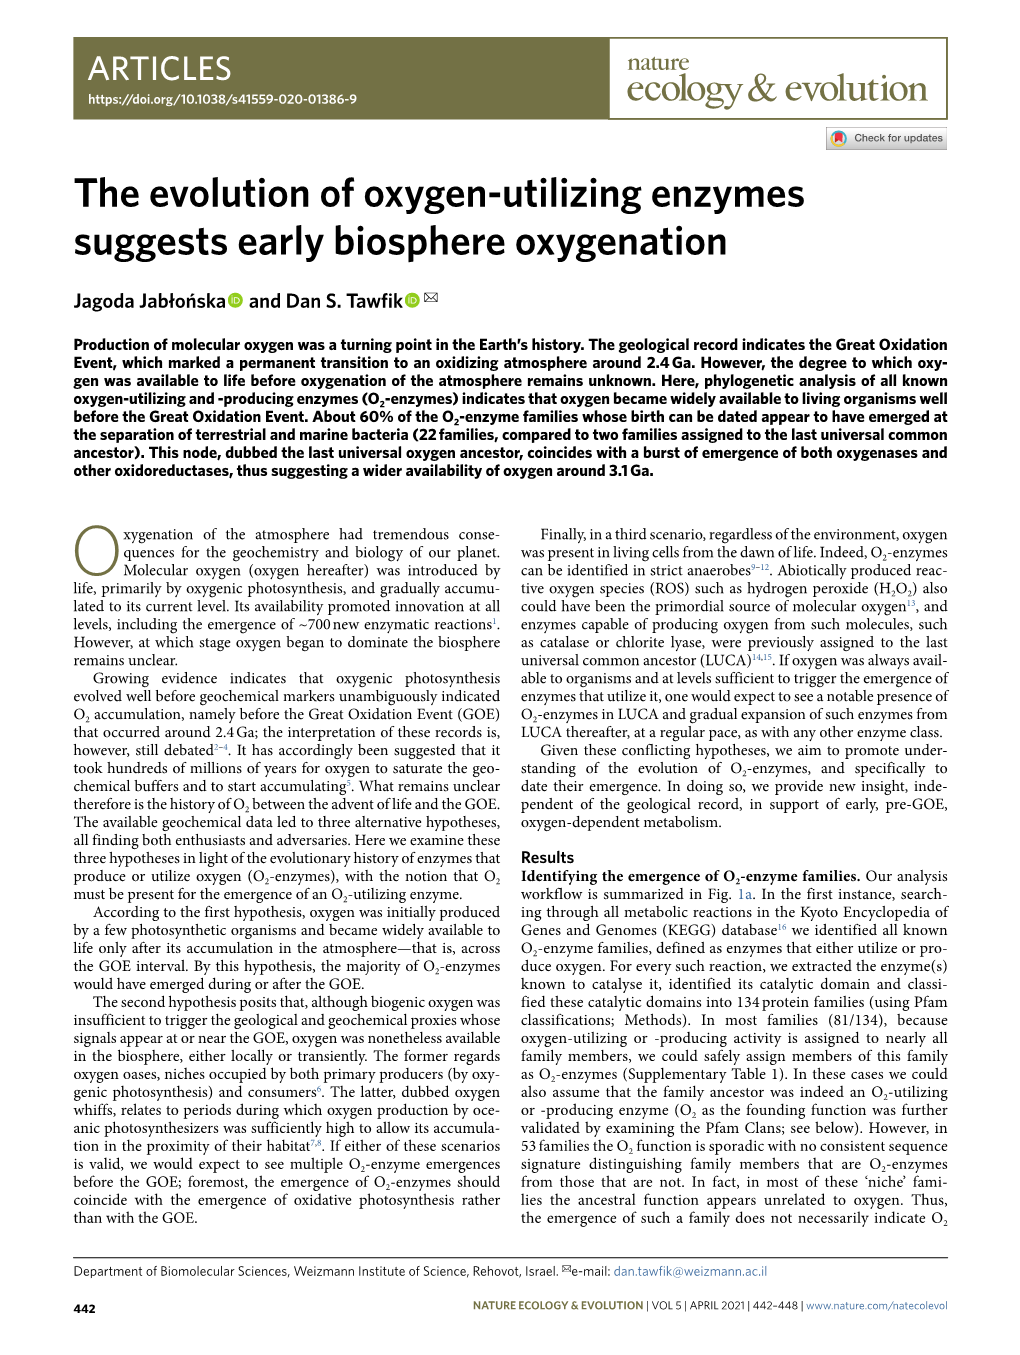 The Evolution of Oxygen-Utilizing Enzymes Suggests Early Biosphere Oxygenation